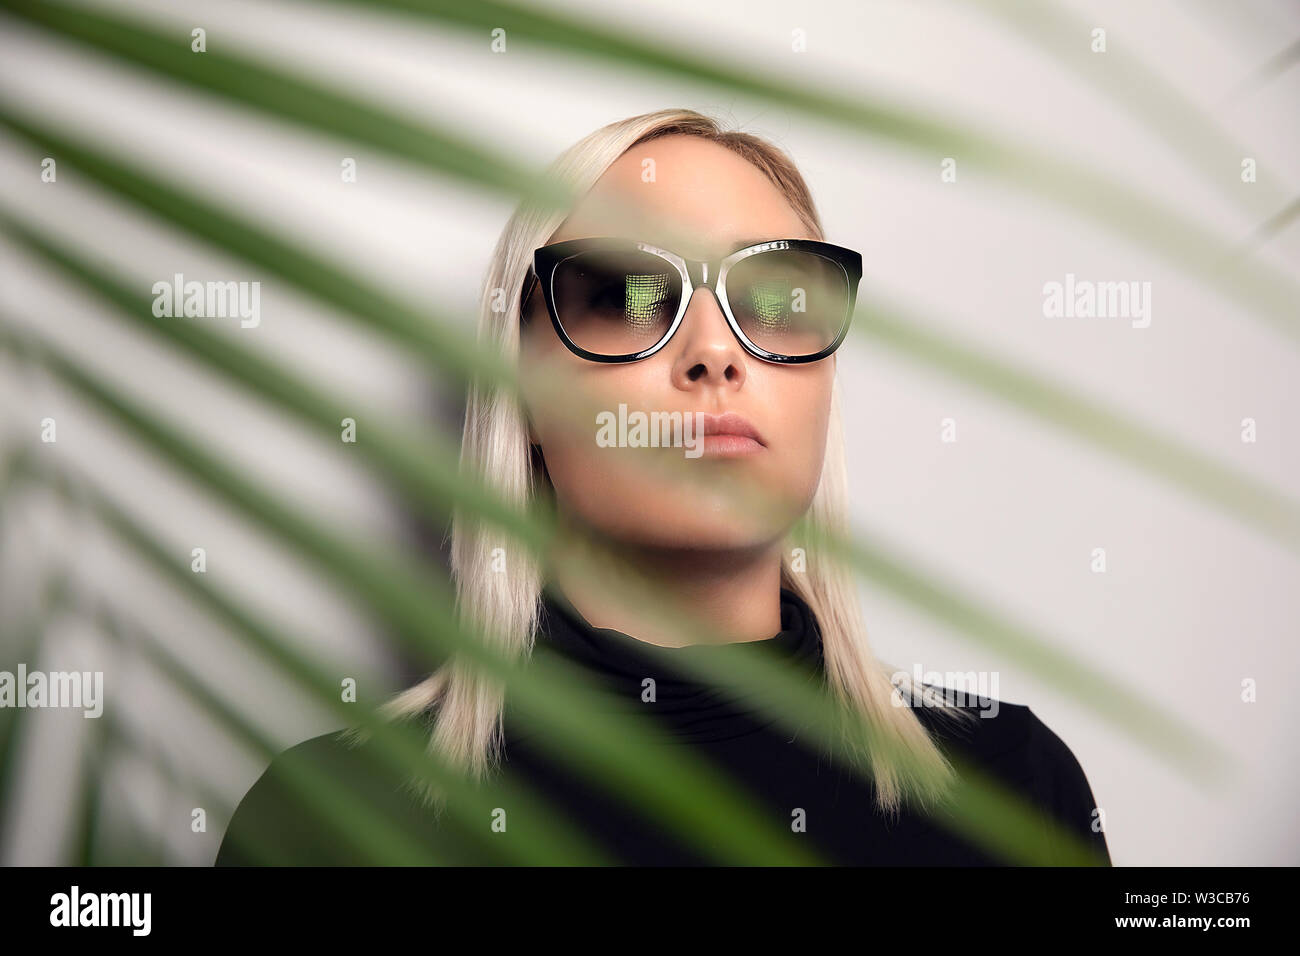 Gorgeous woman in sunglasses in tropical environment Stock Photo